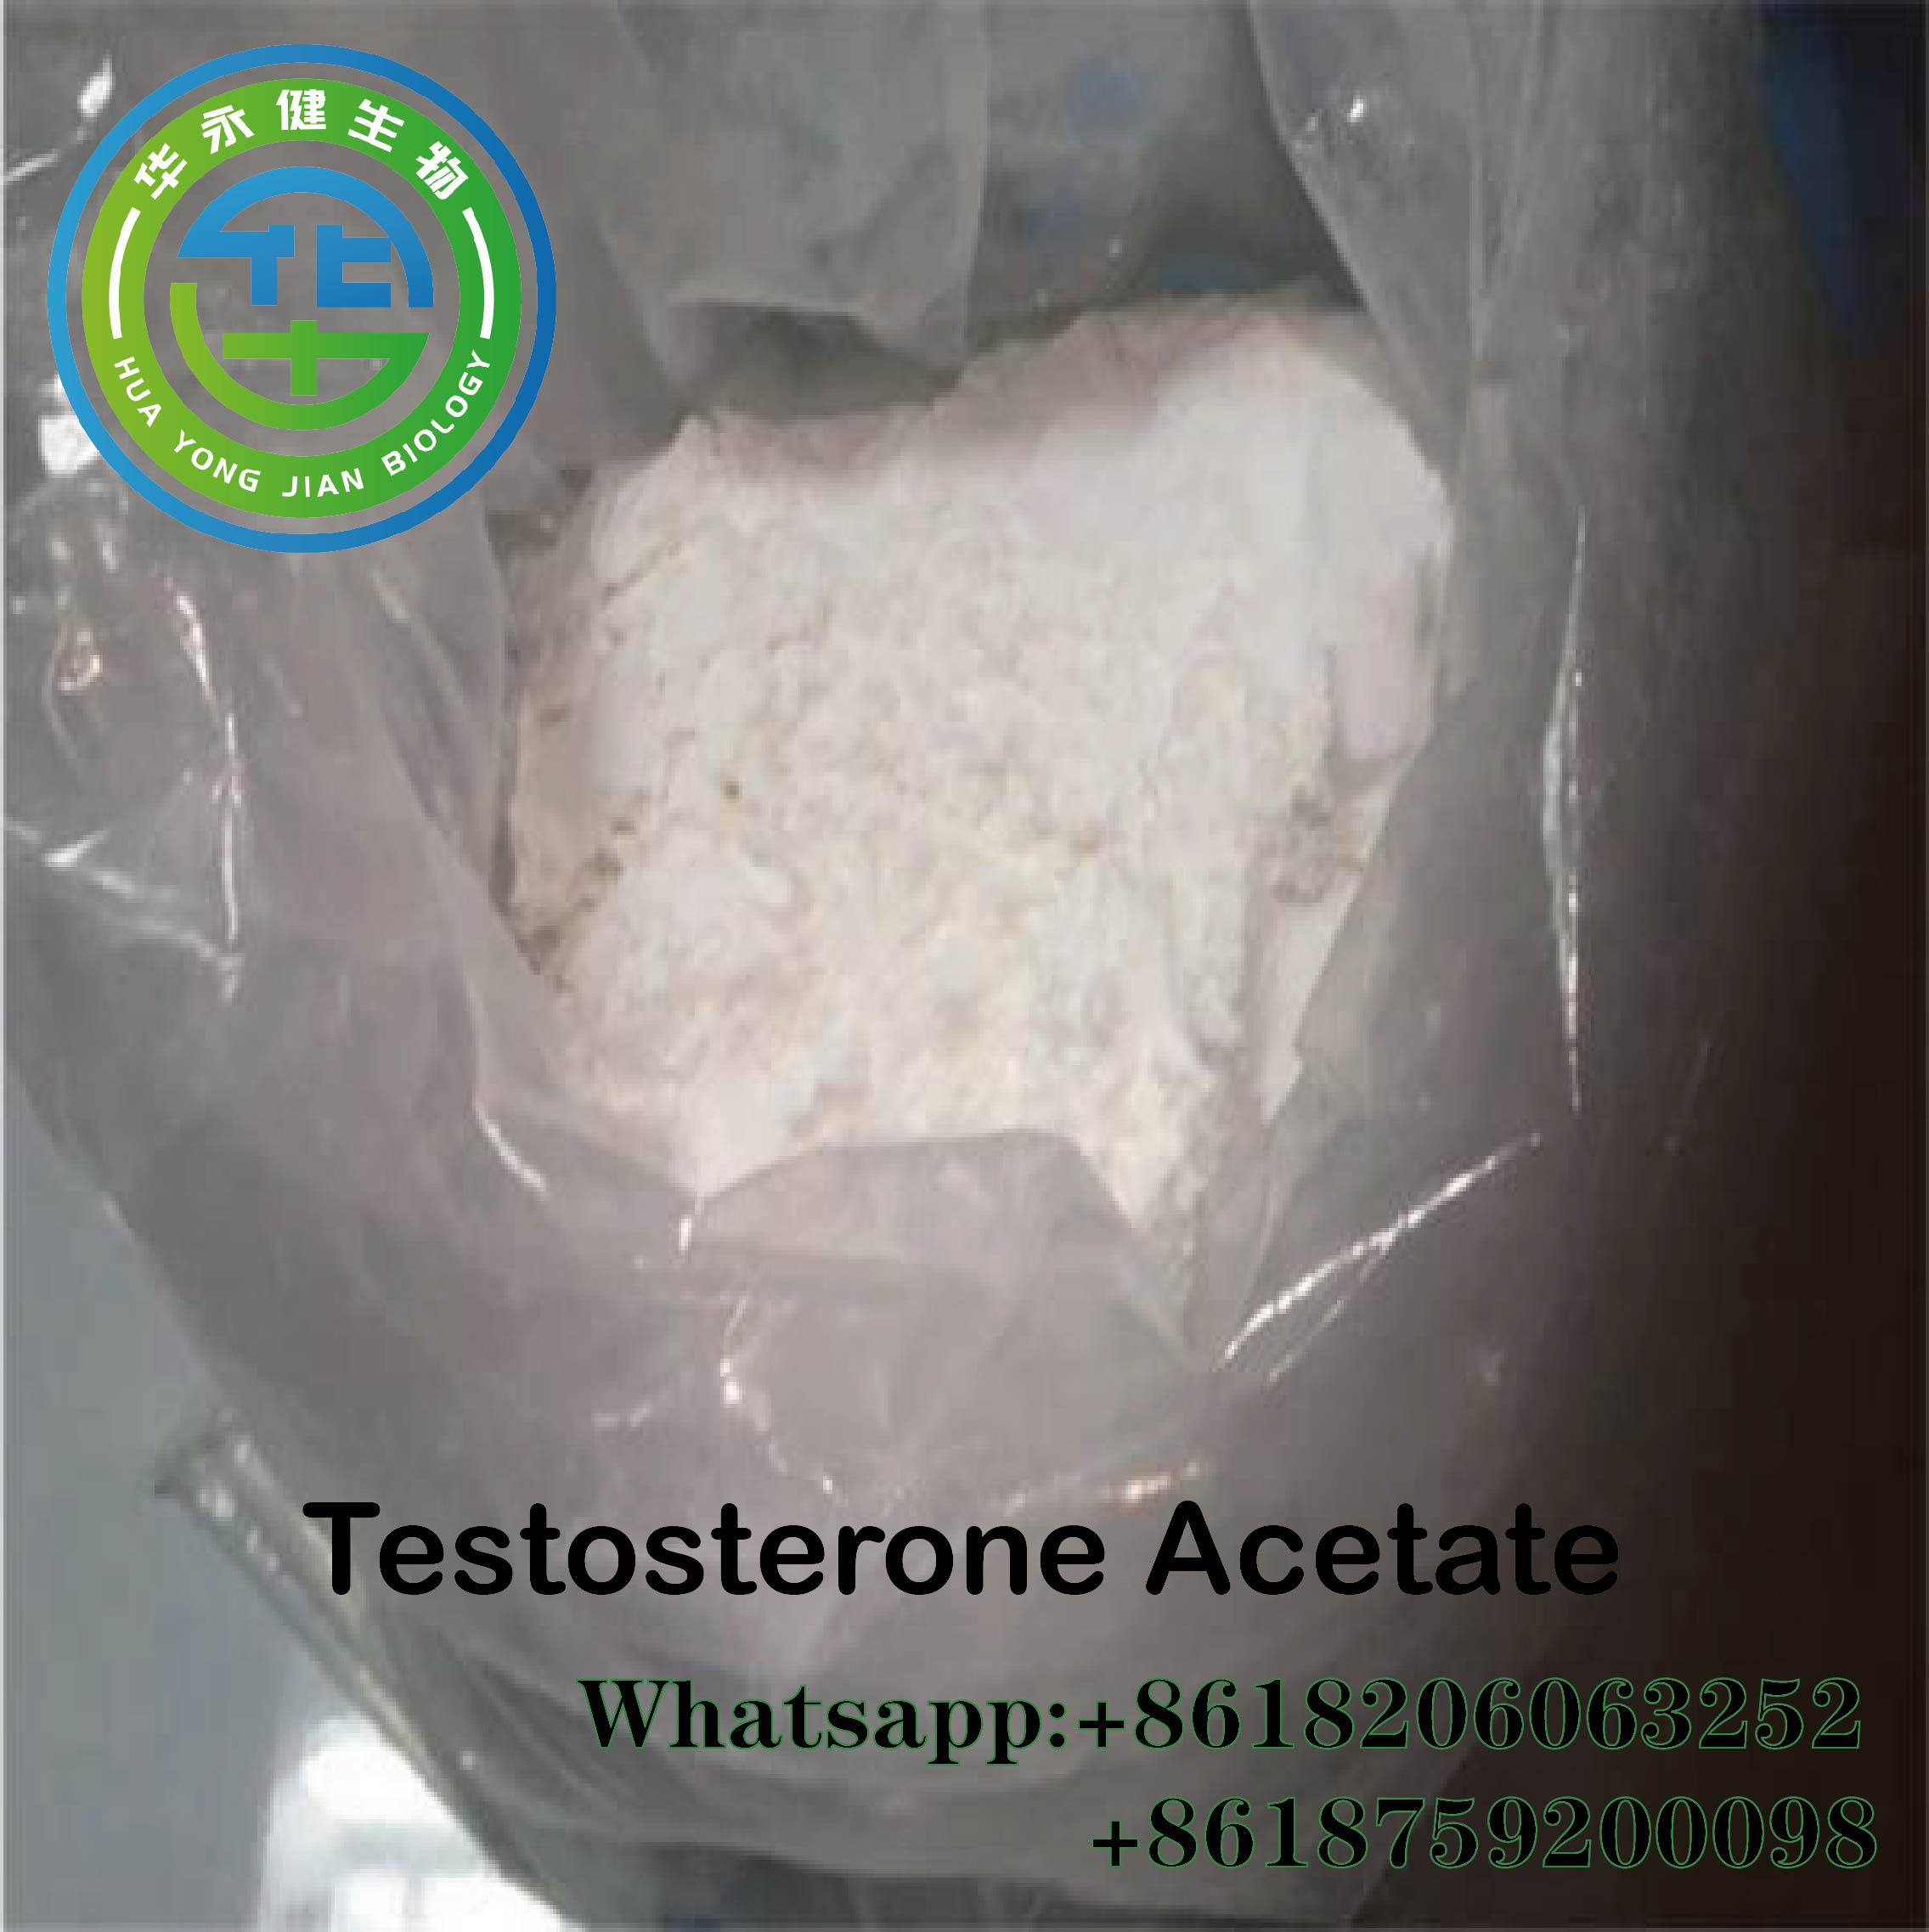 Anabilc Steroids Test Ace Steroid Hormone Powder Testosterone Acetate For Musle Building Test Acetate CasNO.1045-69-8